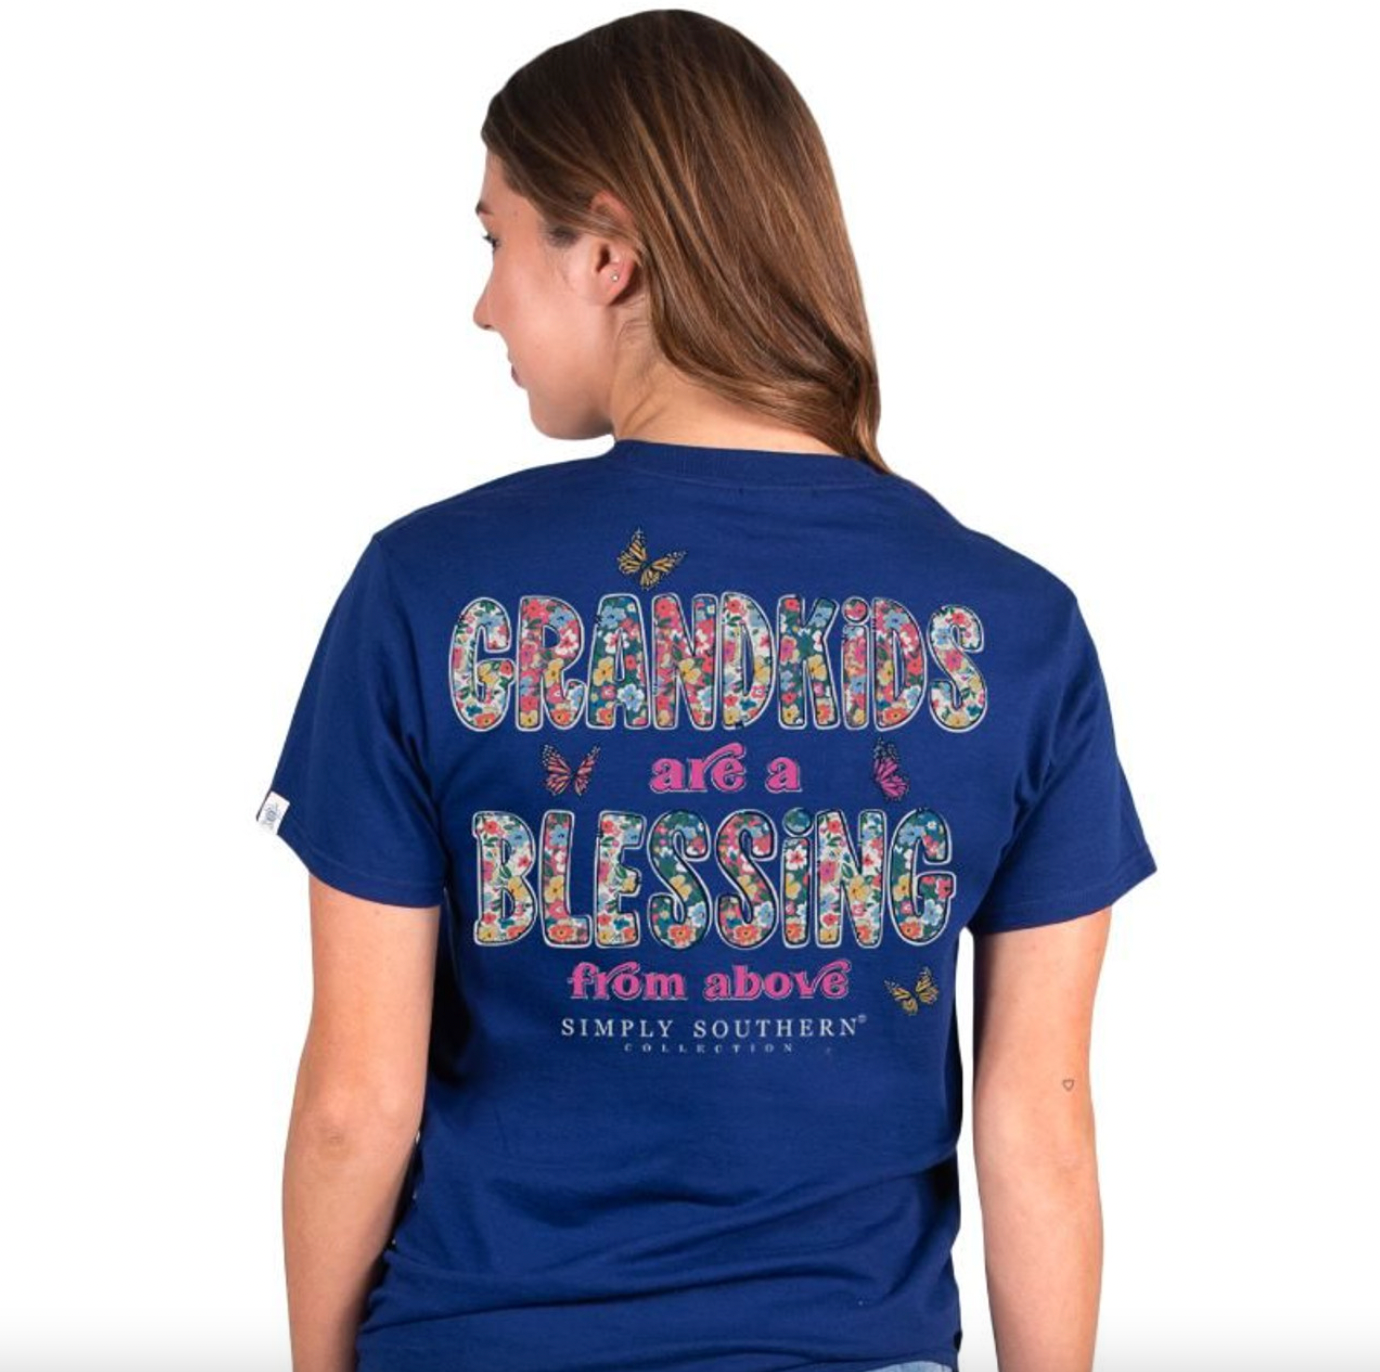 SS GRANDKIDS BLESSING FROM ABOVE